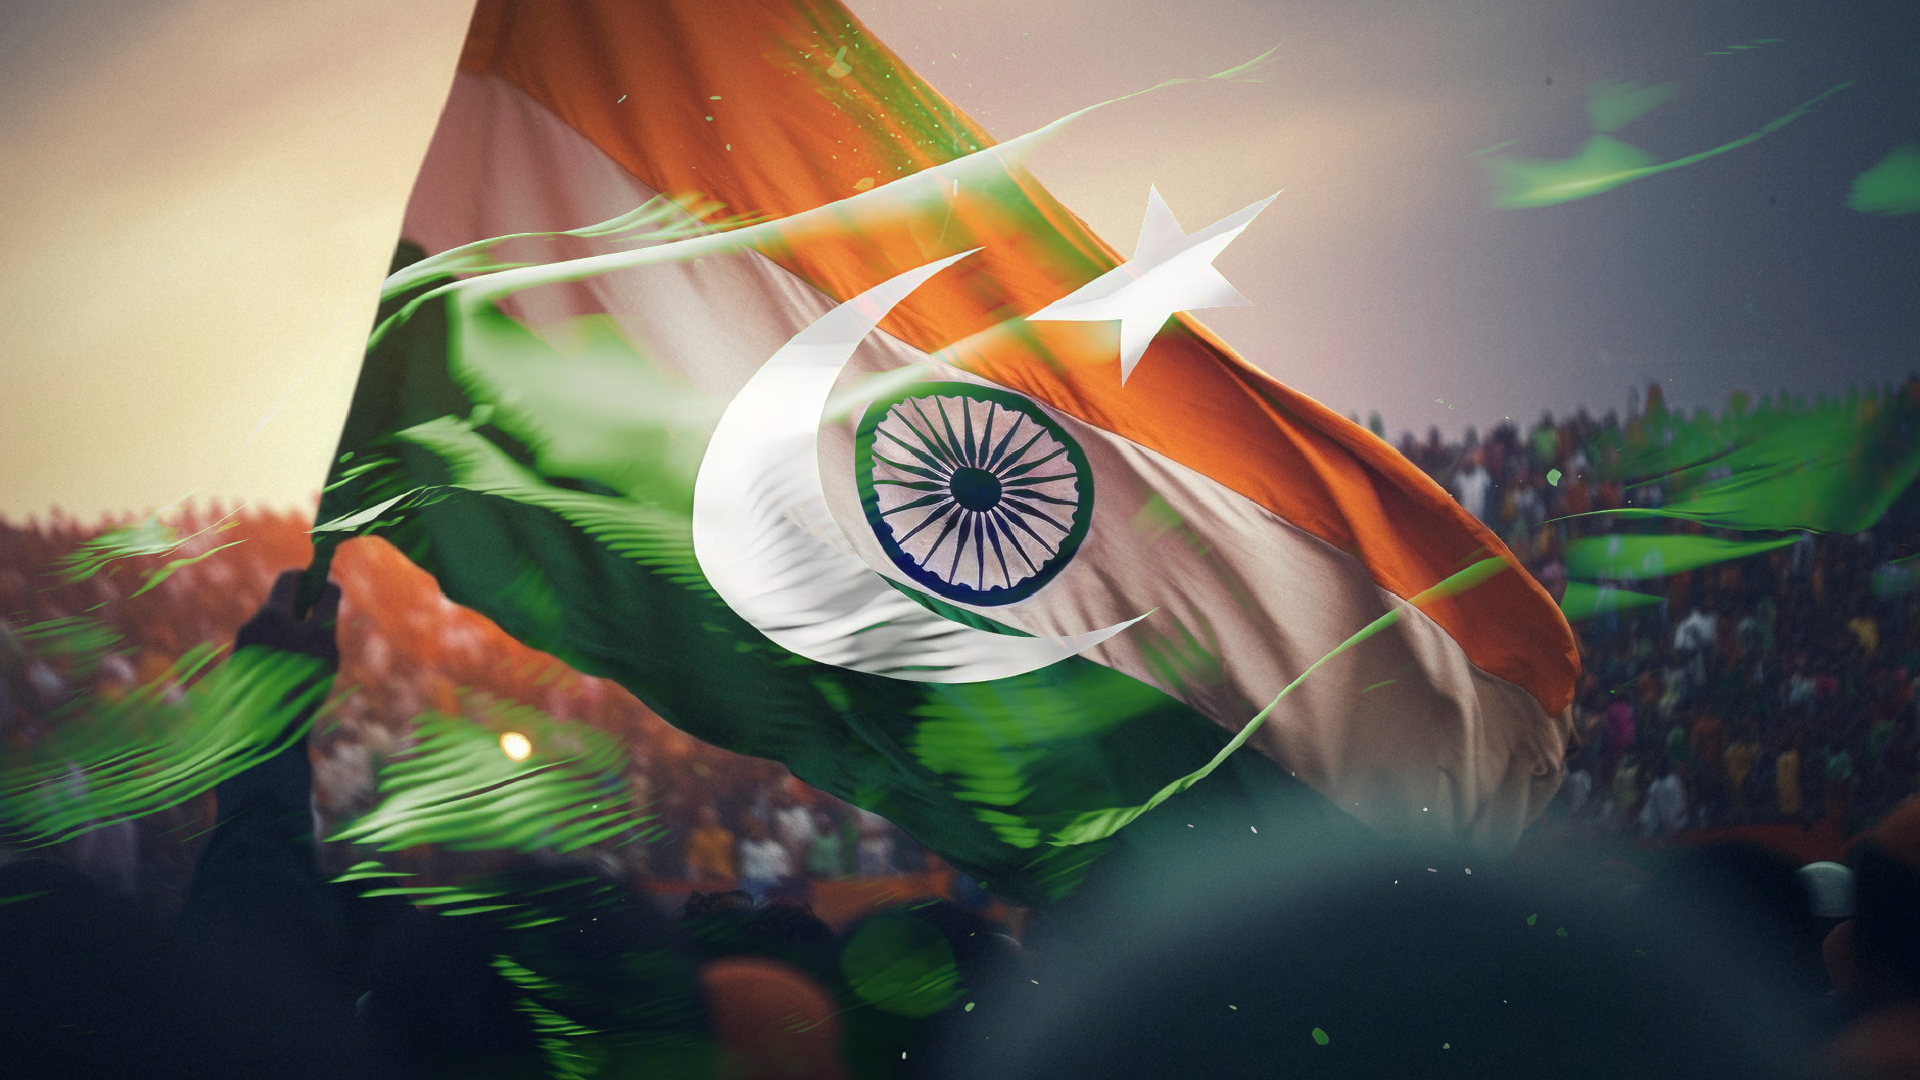 Illustration of a flag blending elements of both the Indian and Pakistani flags, with a crowd in the background, symbolizing unity or a diplomatic event between the two countries.